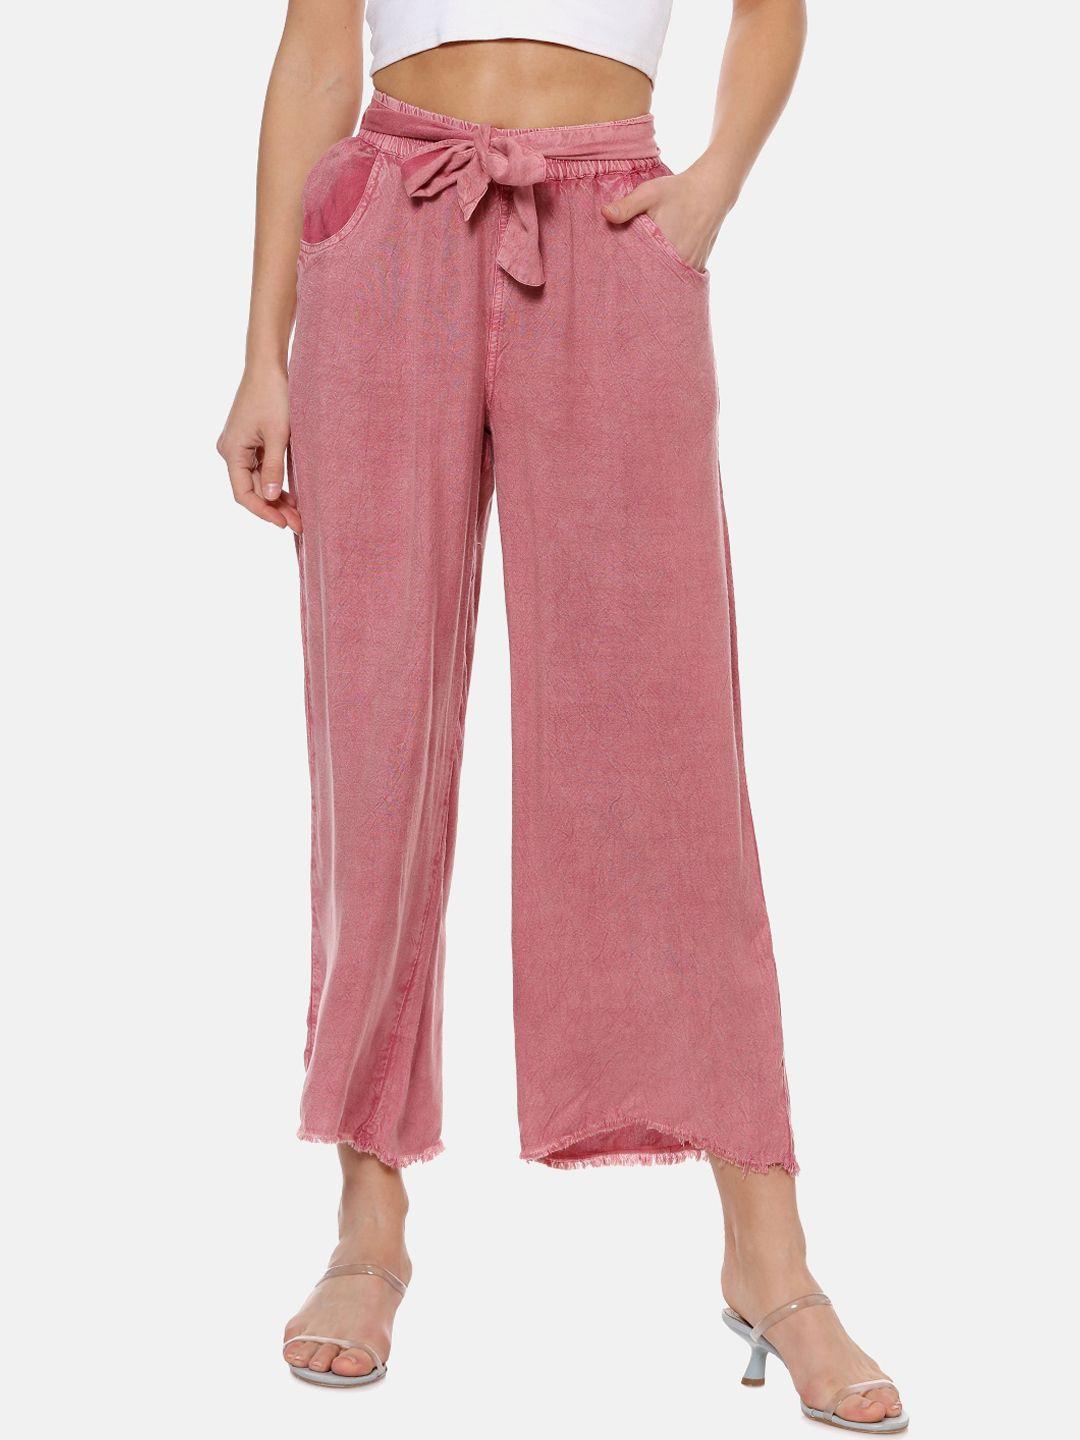 campus-sutra-women-pink-flared-solid-peg-trousers